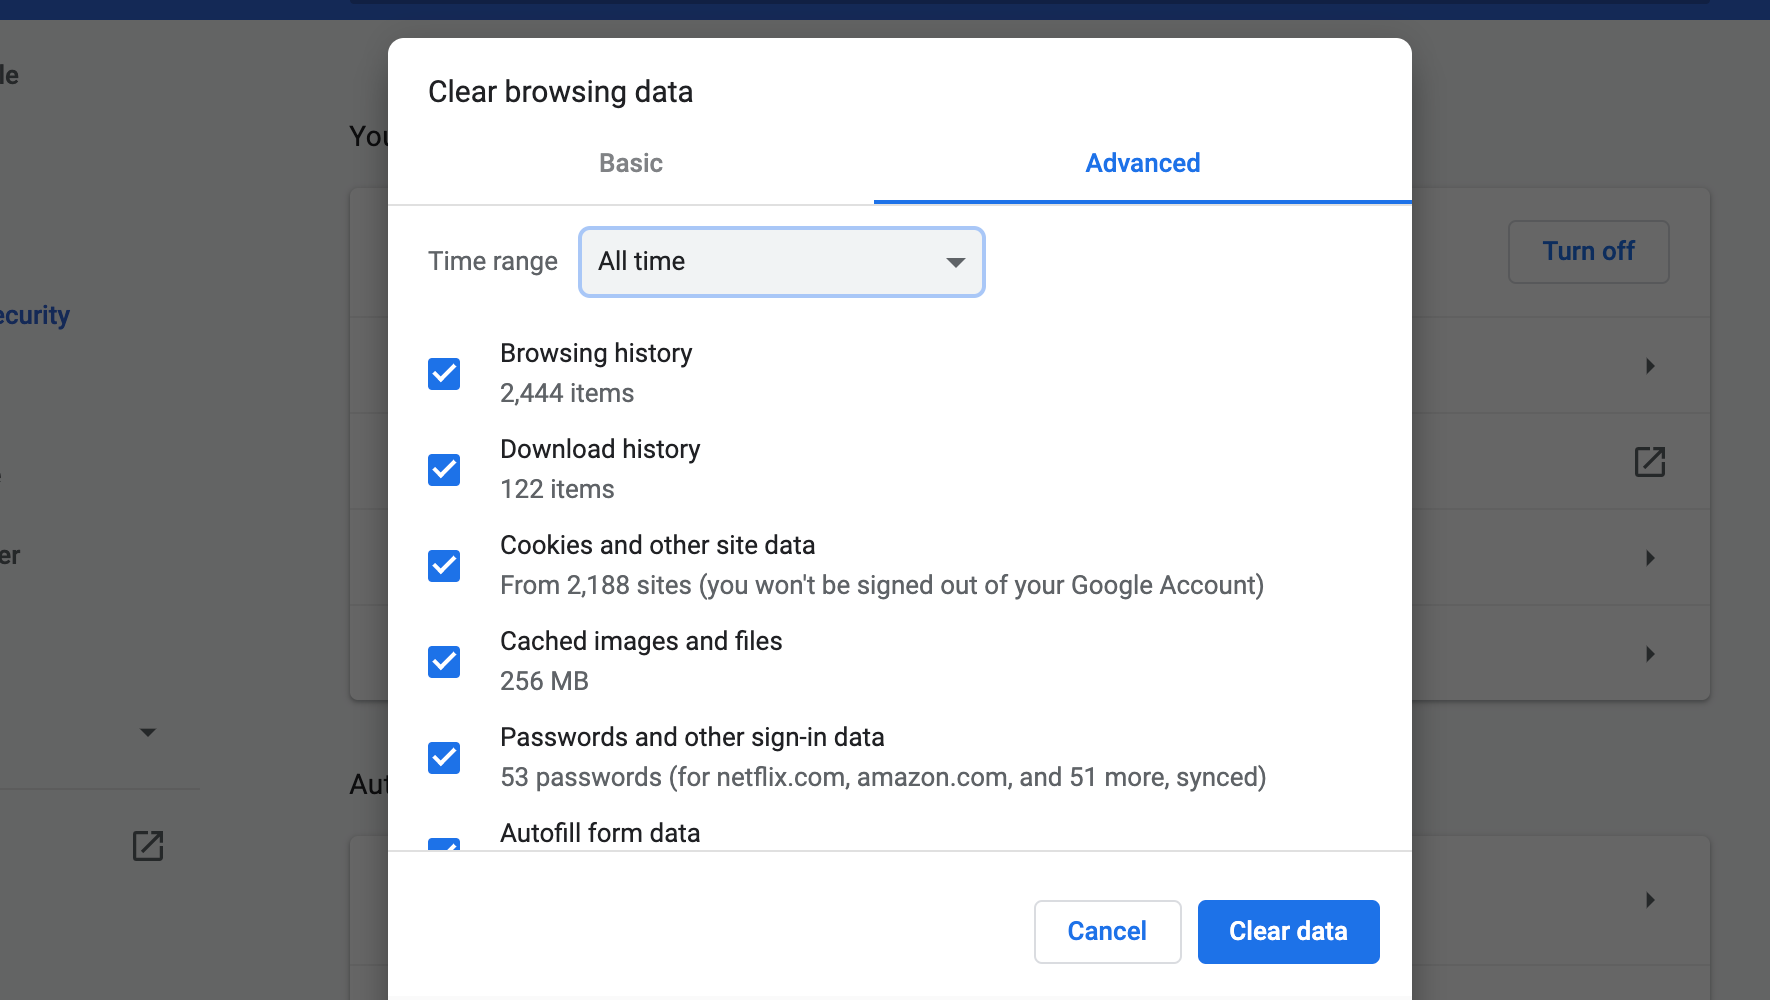 Clear Browsing Data window in Google Chrome Settings is open, with the All Time time range selected and everything checked in the Advanced tab